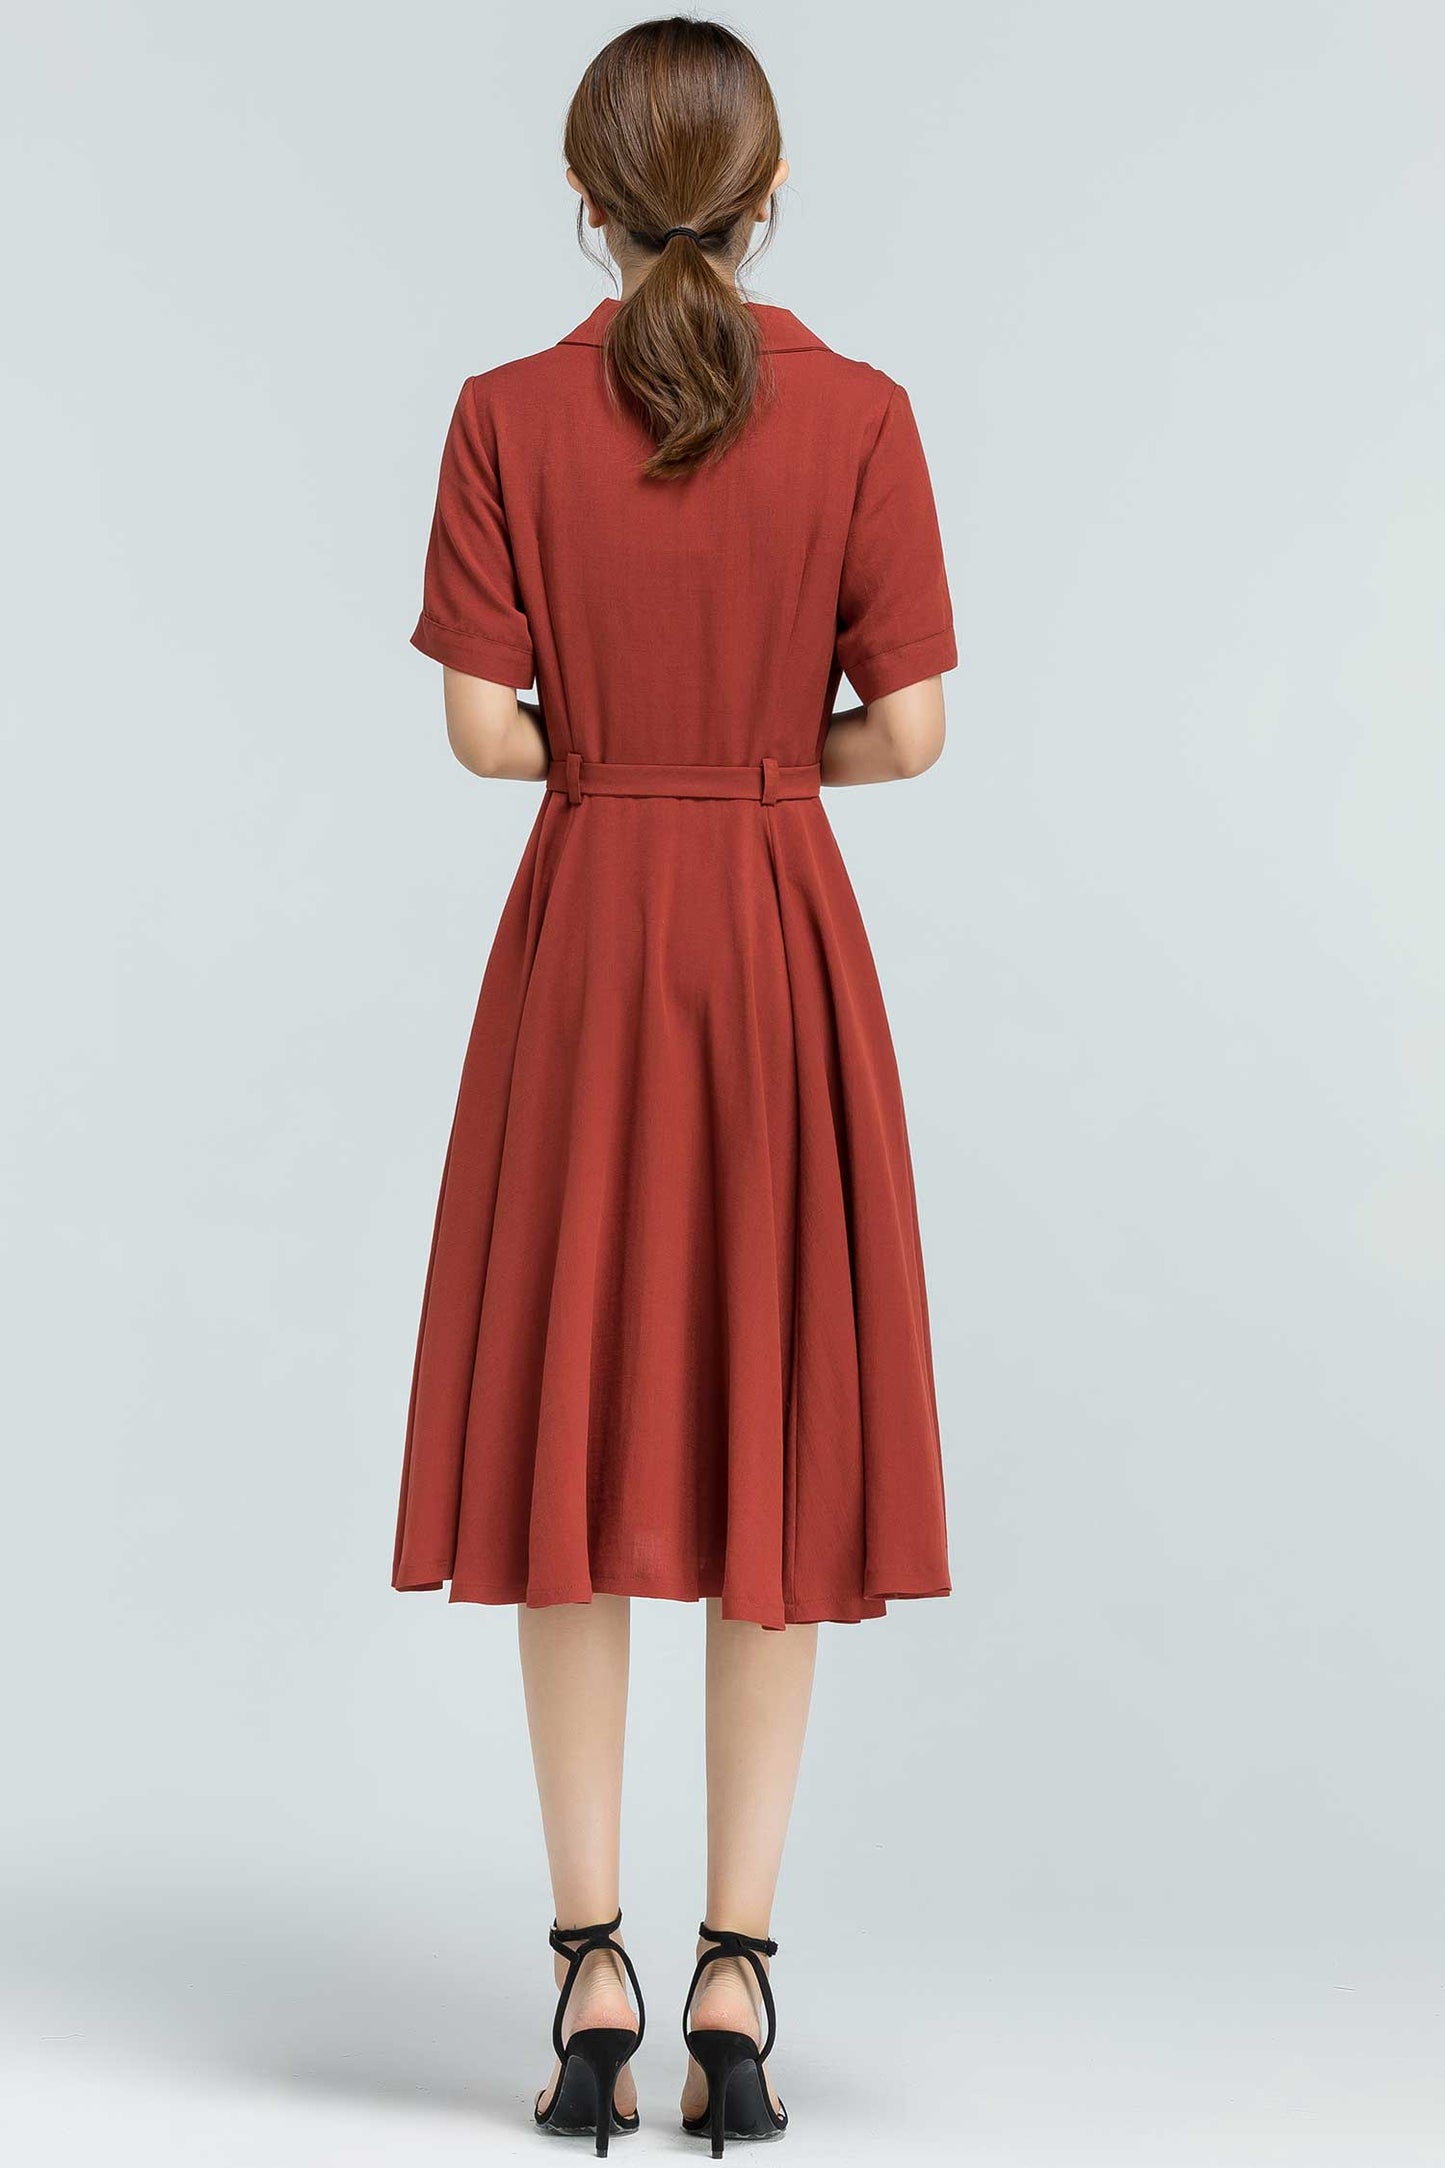 50s inspired swing shirt Dress in Rust red 2372#